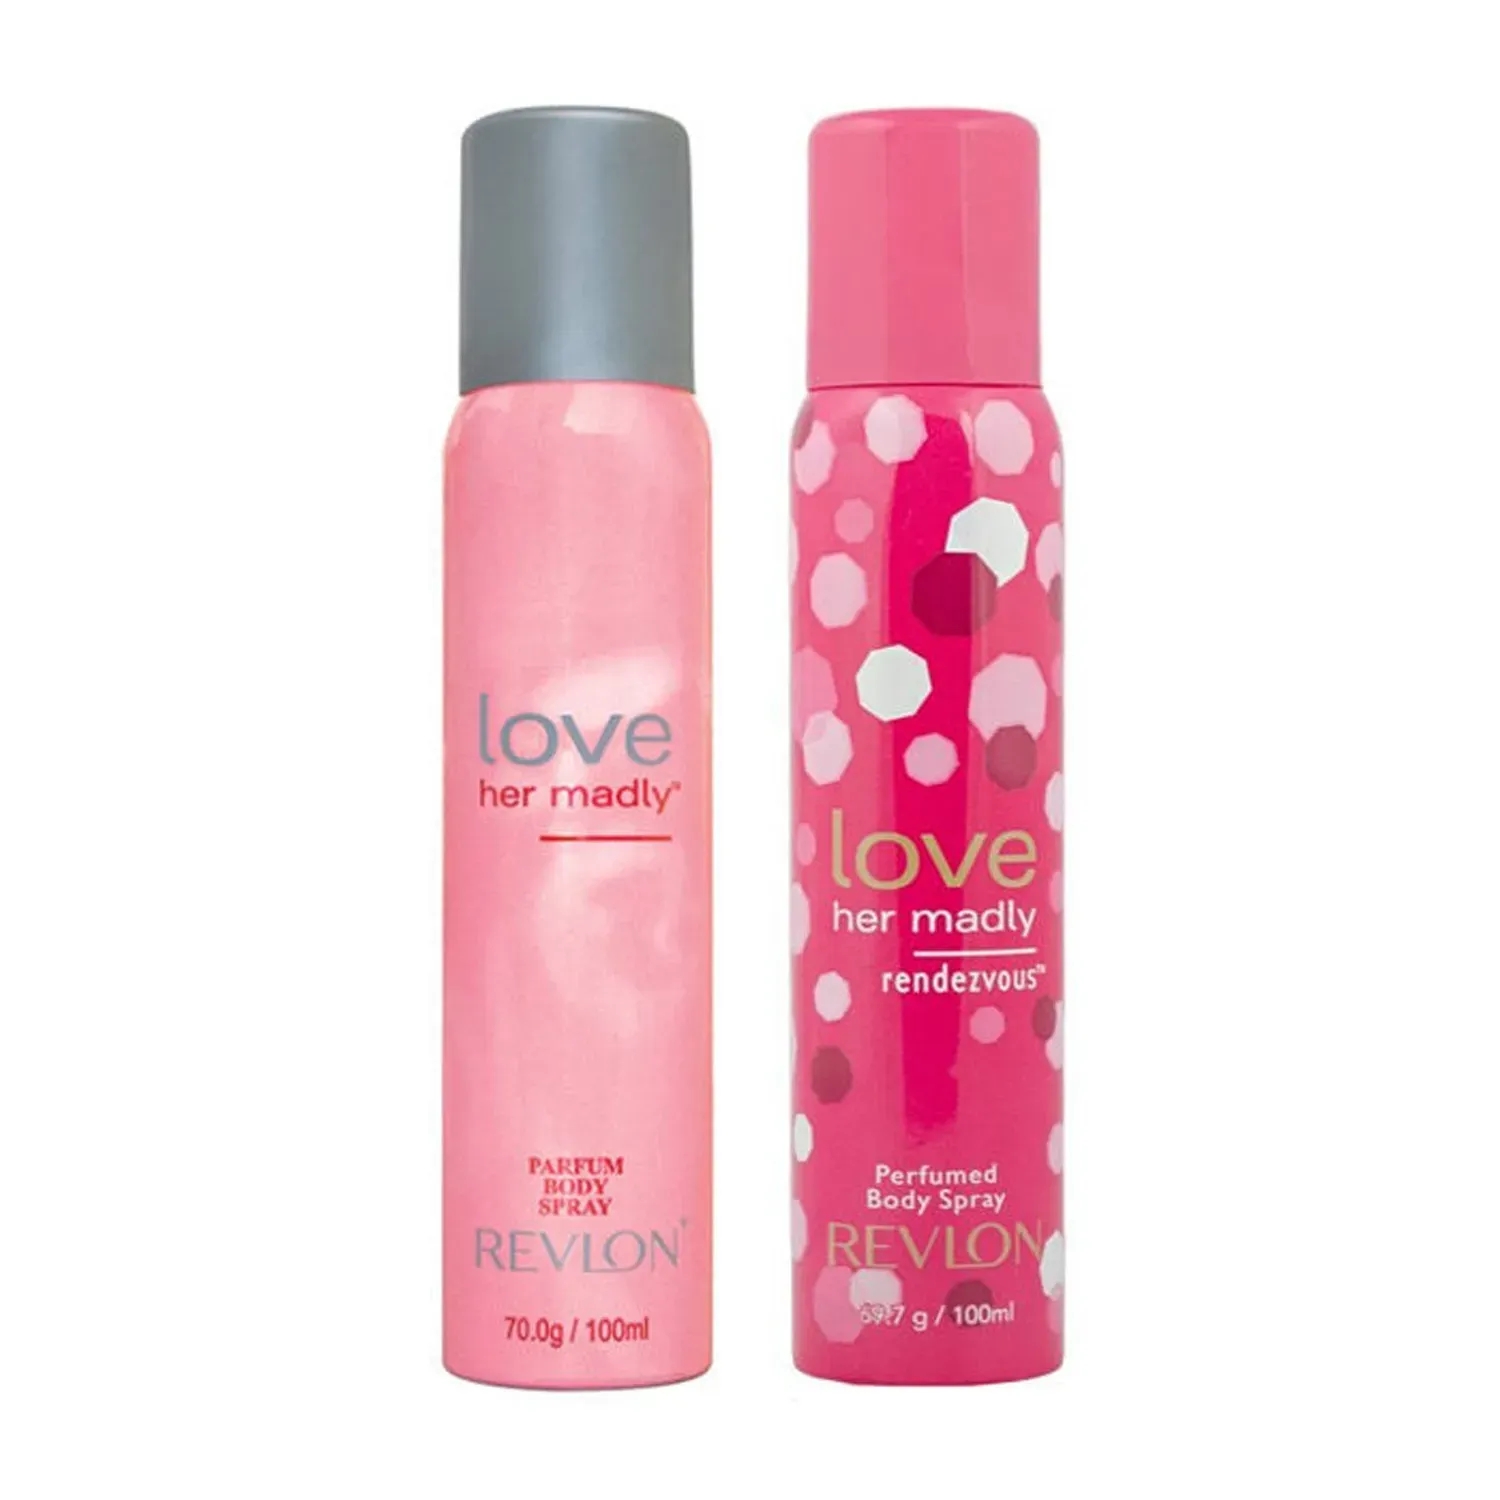 Revlon | Revlon Love Her Madly Rendezvous And Love Her Madly Perfumed Body Spray (2Pcs)